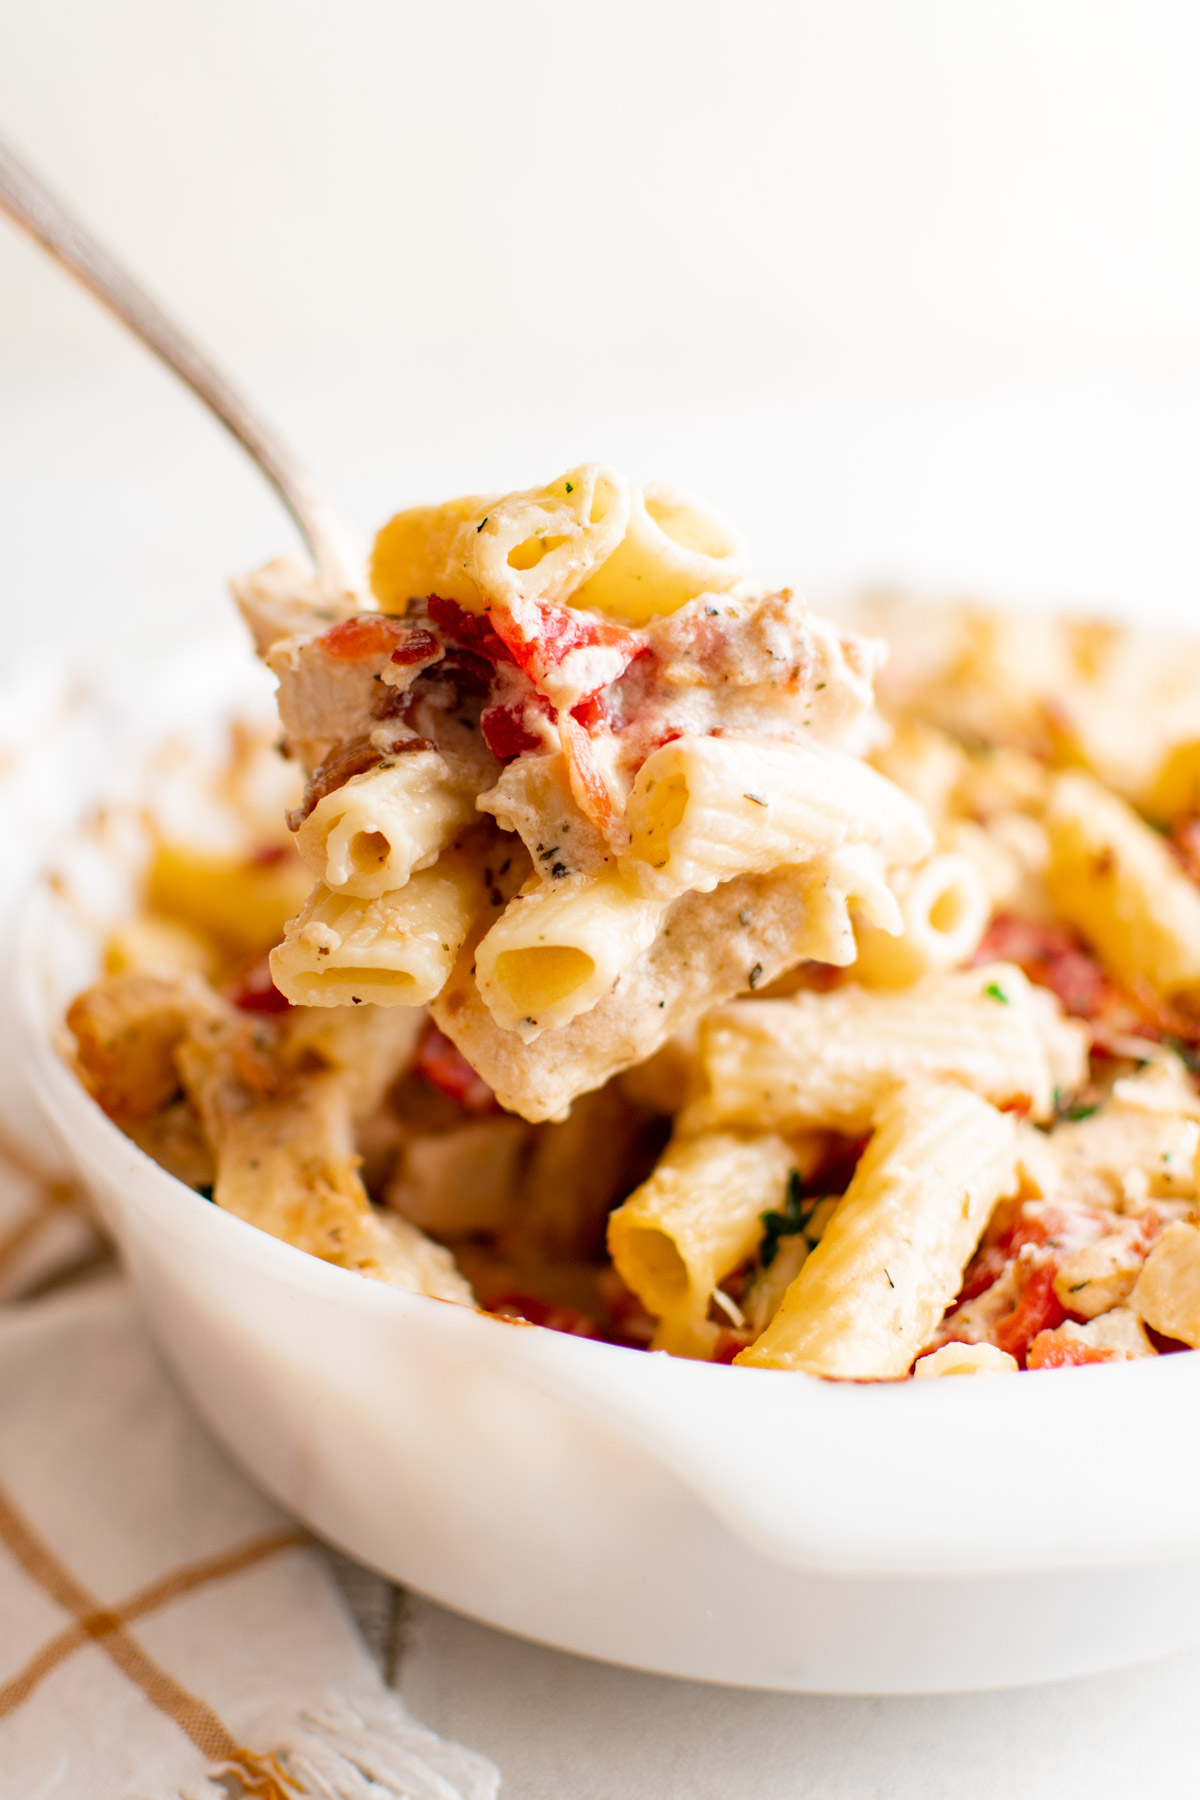 Bowl of pasta with cheese sauce, bacon and chicken and a spoon.